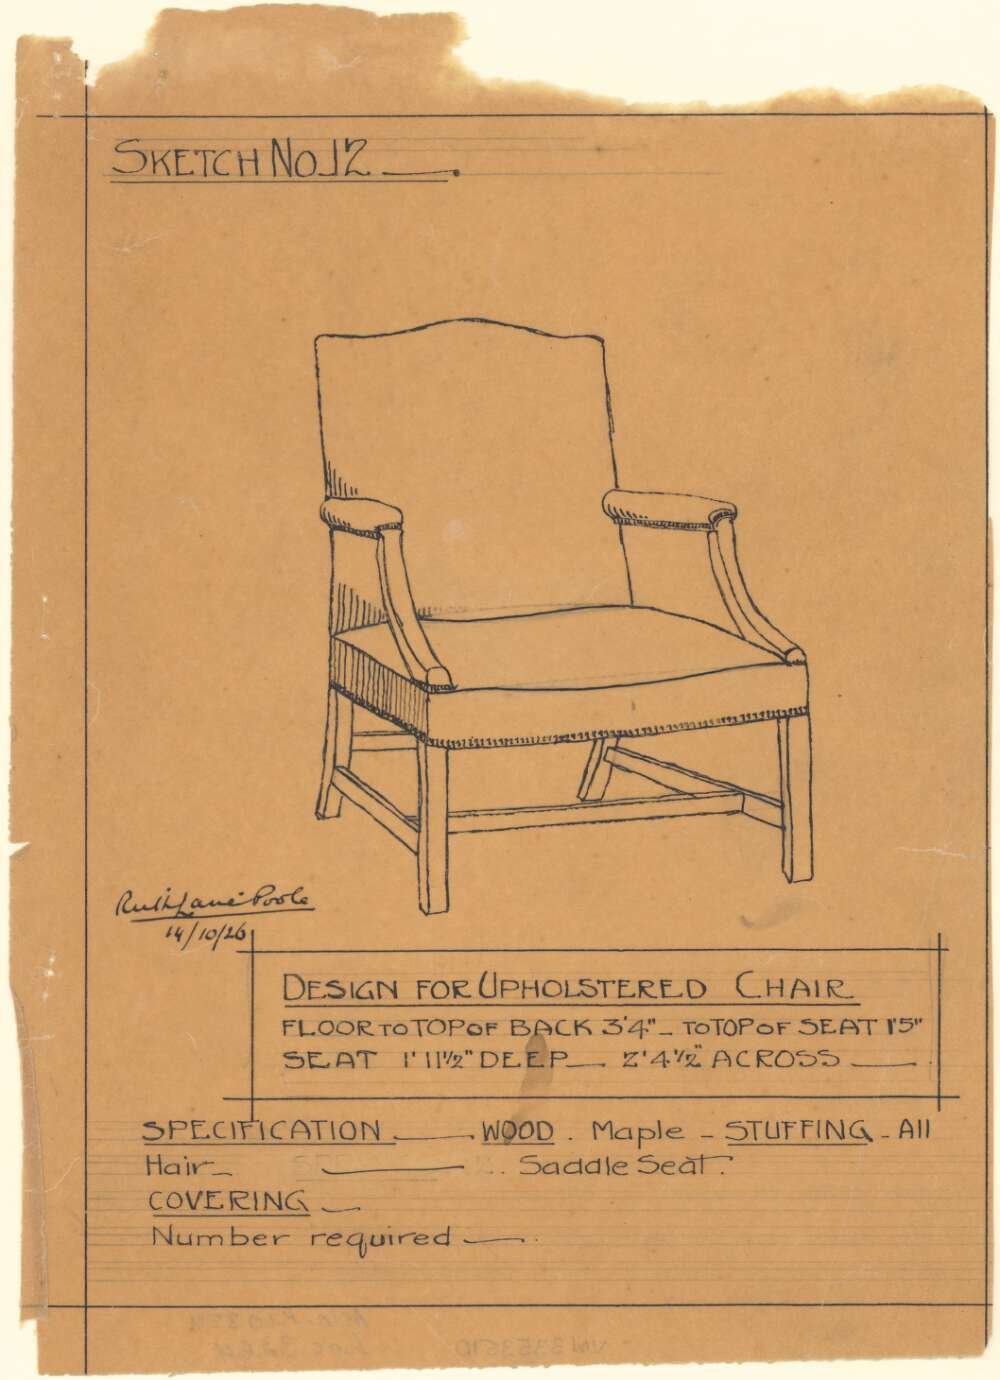 Sketch of a chair on brown paper with design specifications listed below